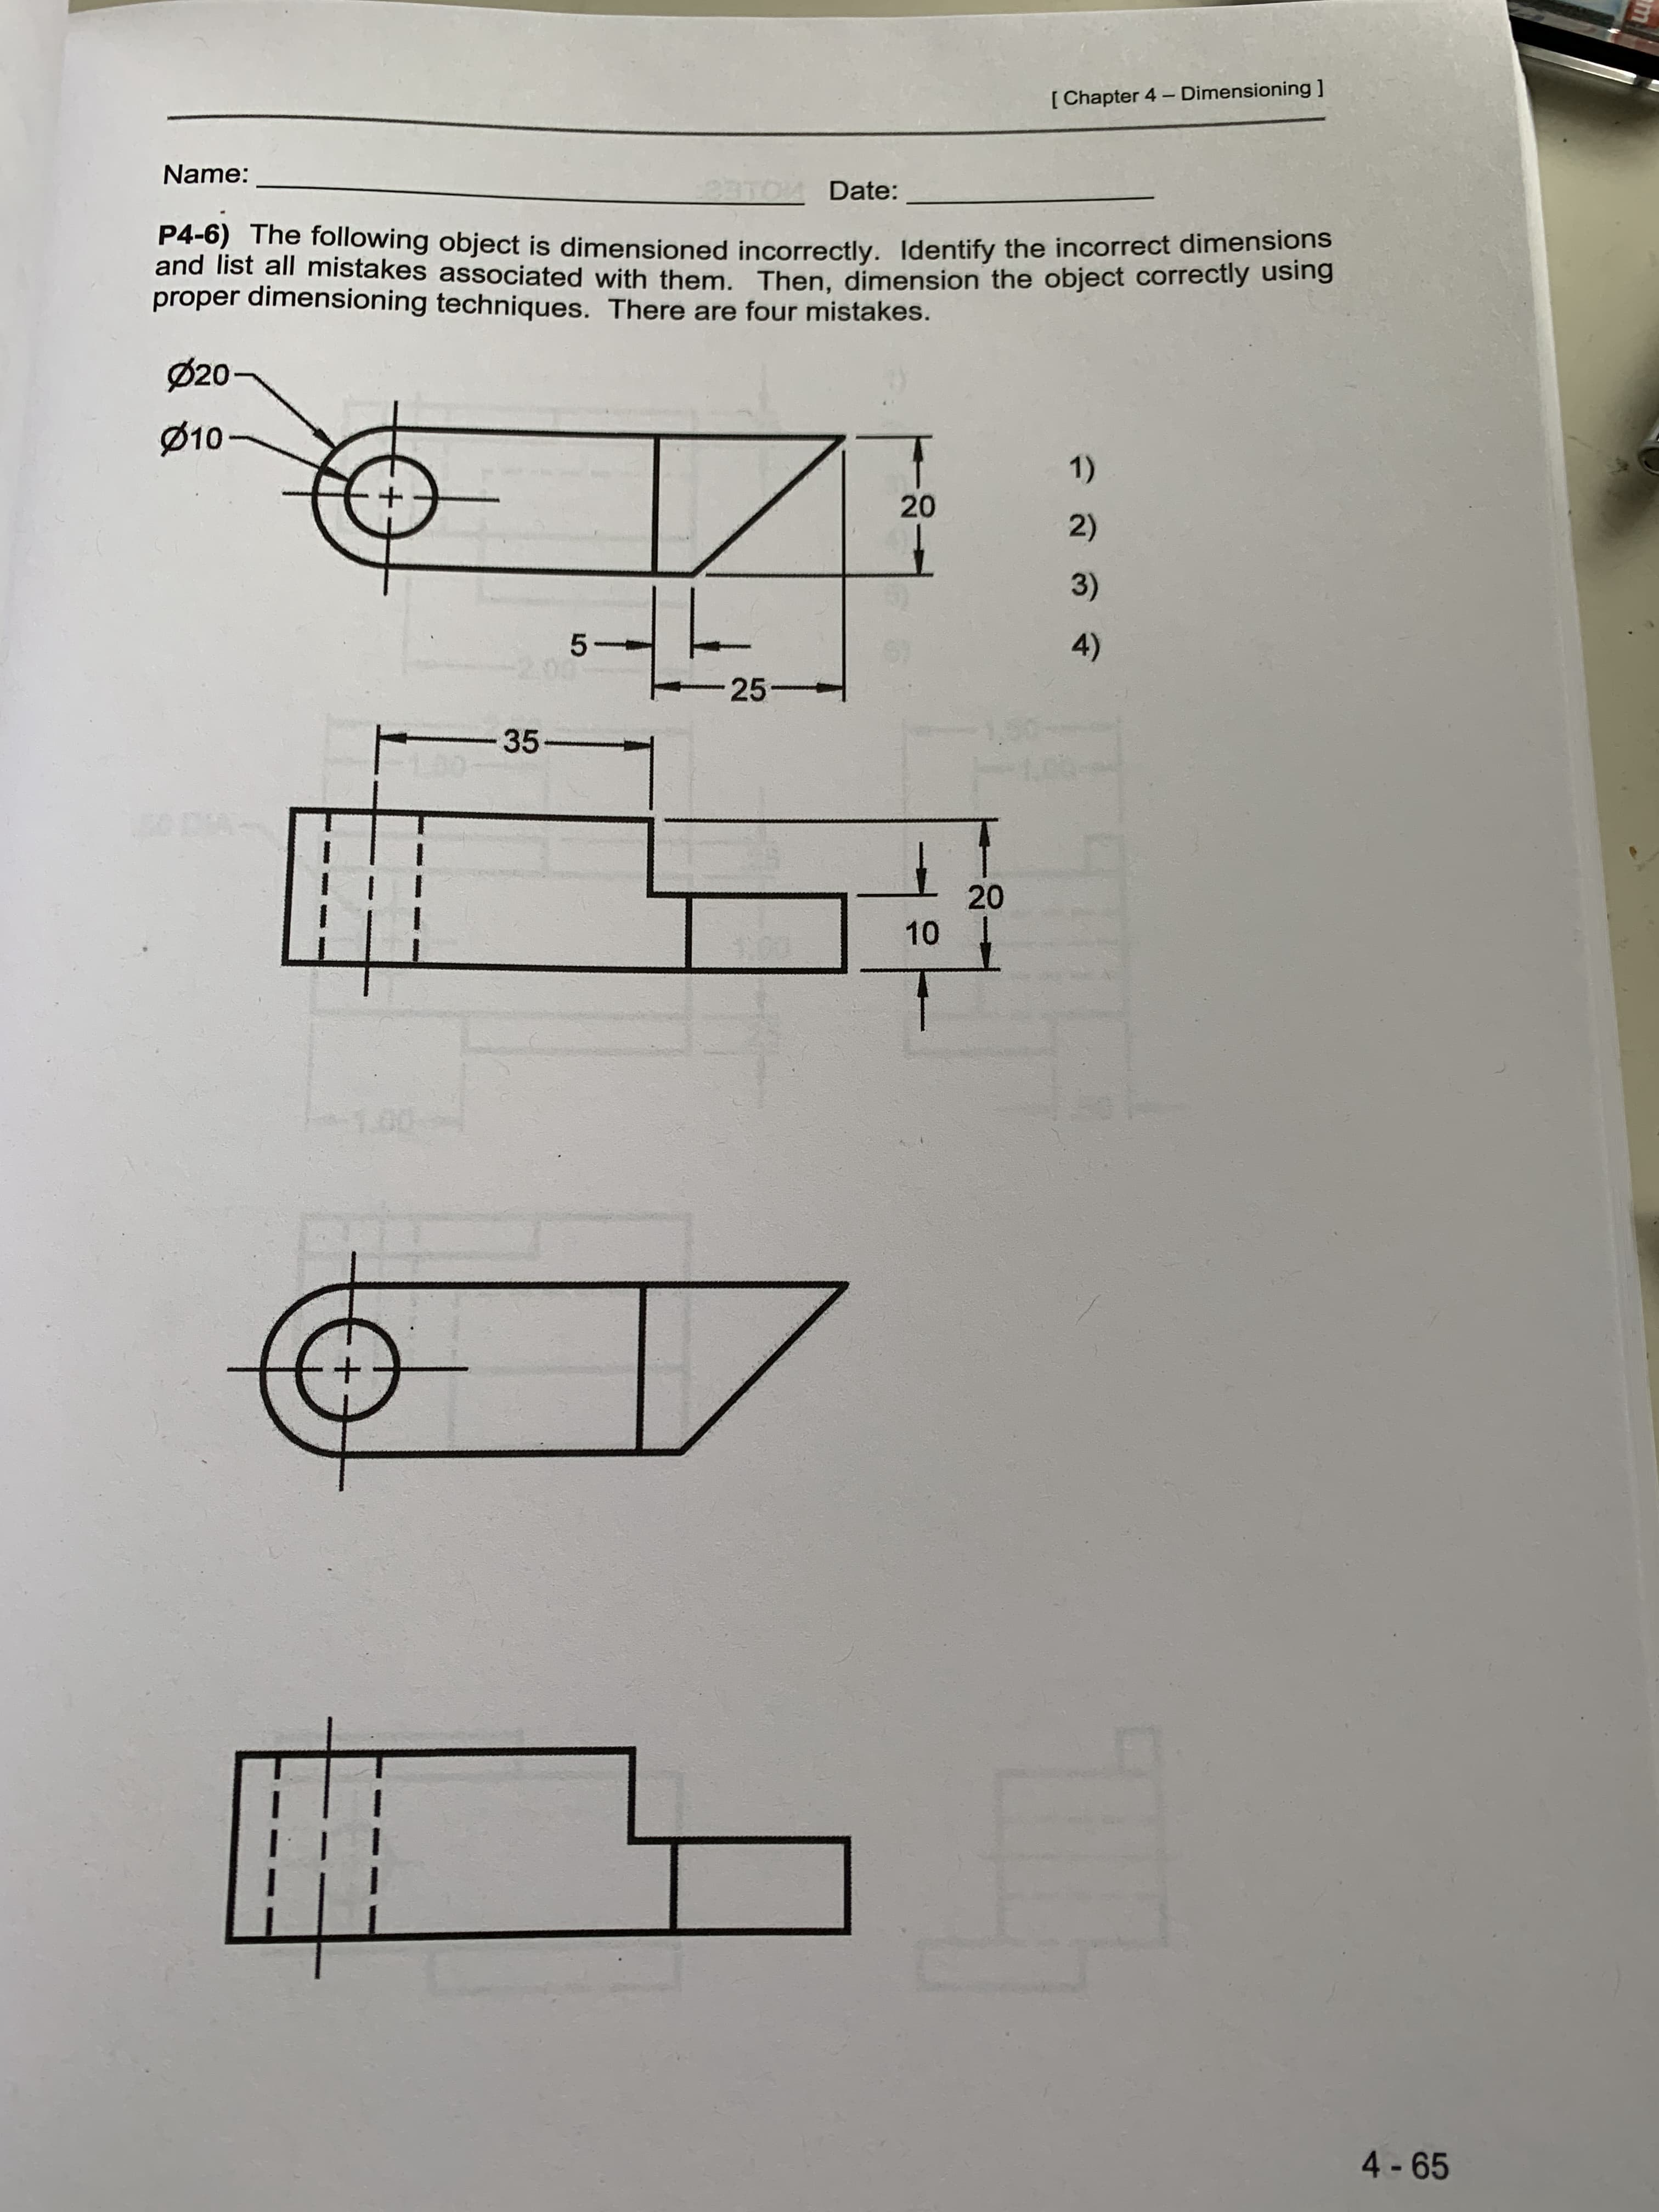 Name:
33TOM Date:
P4-6) The following object is dimensioned incorrectly. Identify the incorrect dimensions
and list all mistakes associated with them. Then, dimension the object correctly using
proper dimensioning techniques. There are four mistakes.
